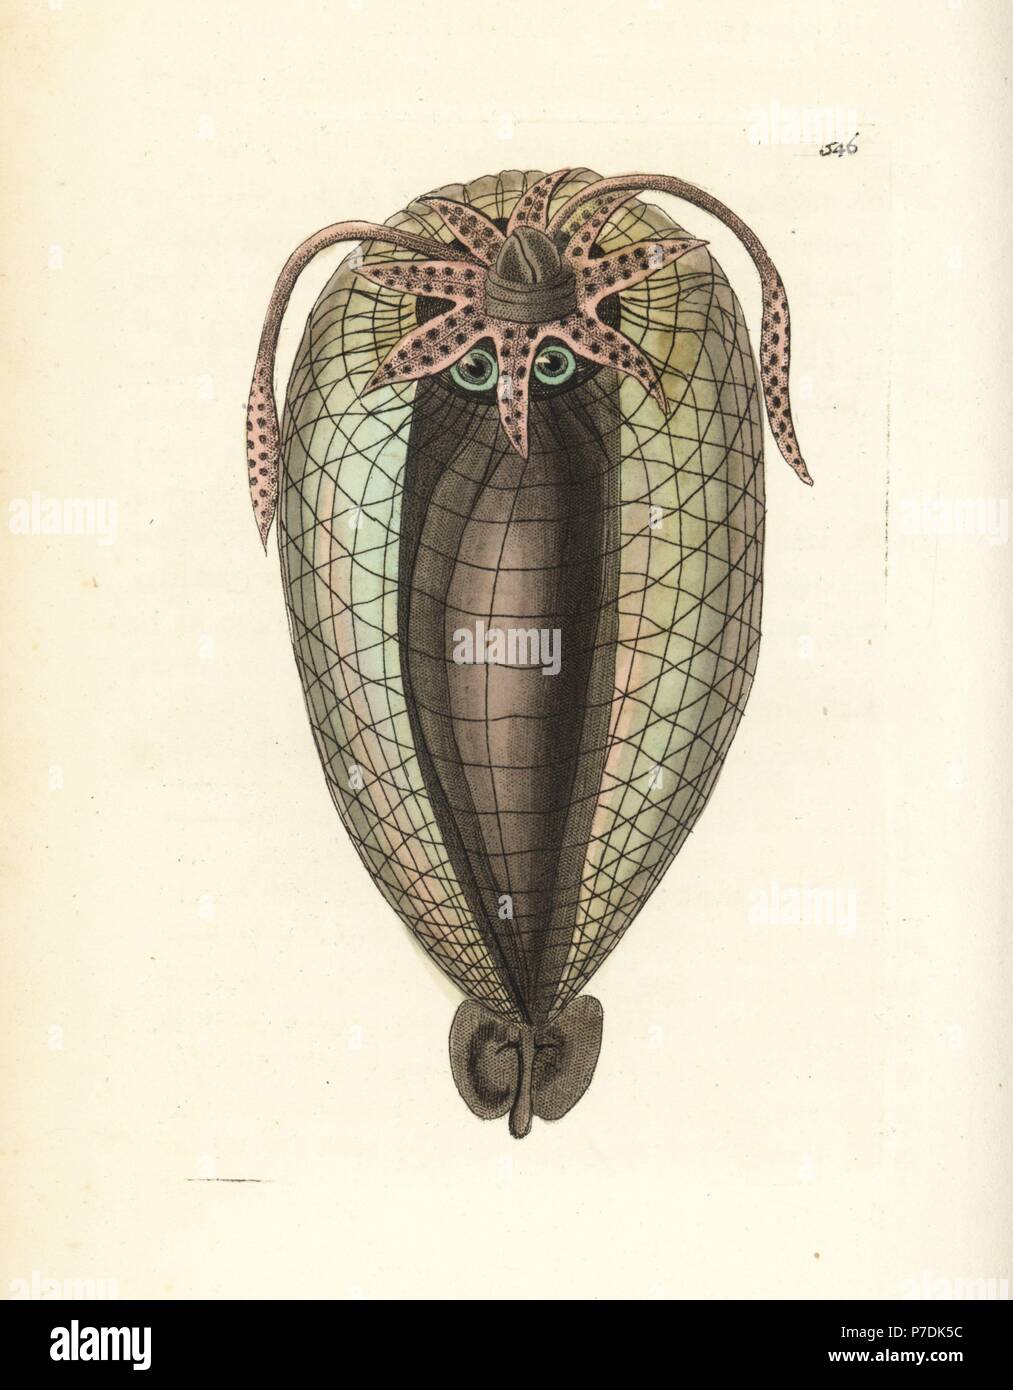 Humboldt squid, Dosidicus gigas (Balloon cuttlefish, Sepia tunicata). Illustration drawn and engraved by Richard Polydore Nodder. Handcoloured copperplate engraving from George Shaw and Frederick Nodder's The Naturalist's Miscellany, London, 1802. Stock Photo